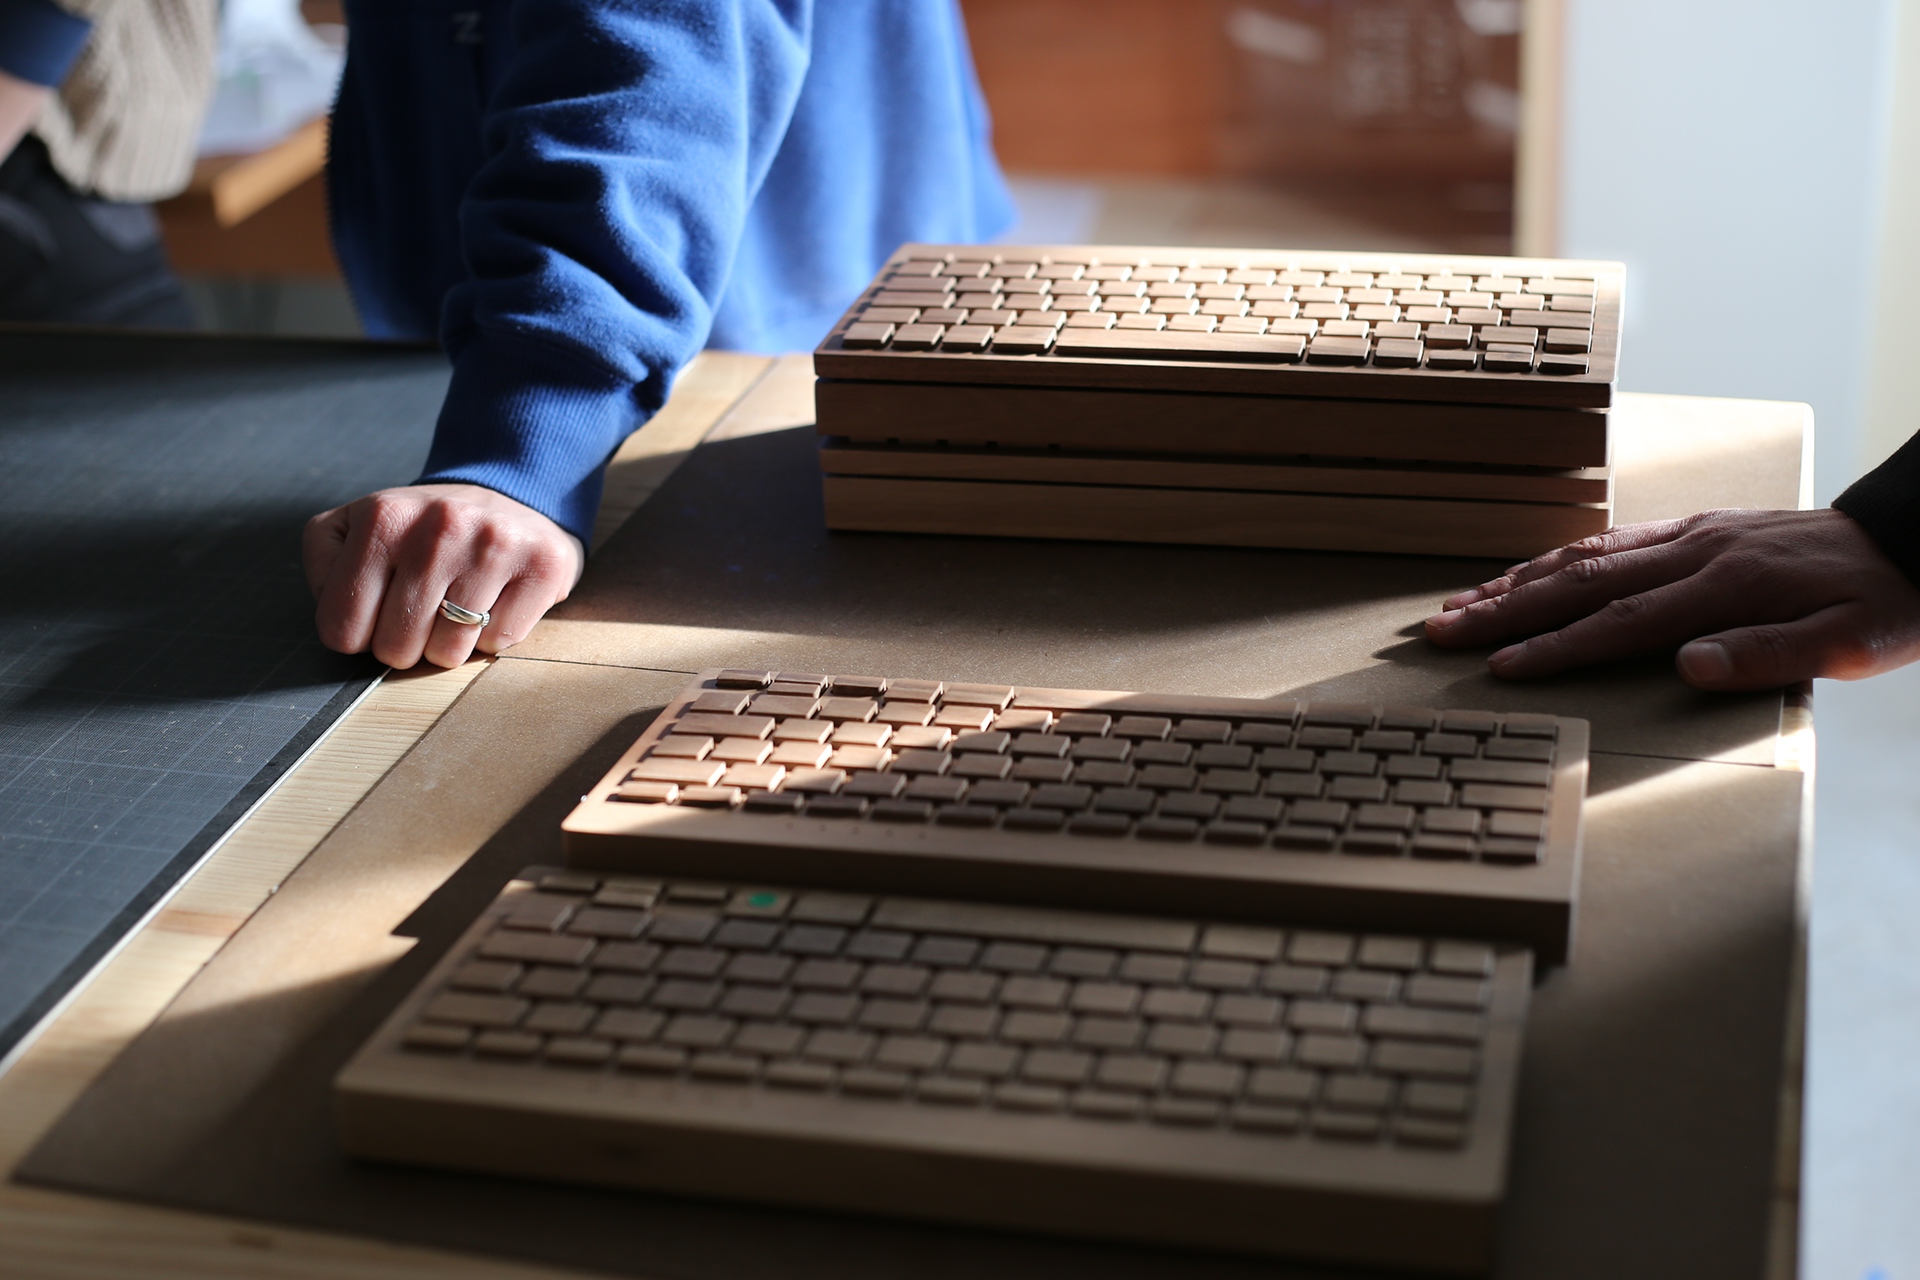 Product Design: Portable Wireless Keyboard by Orée Artisans